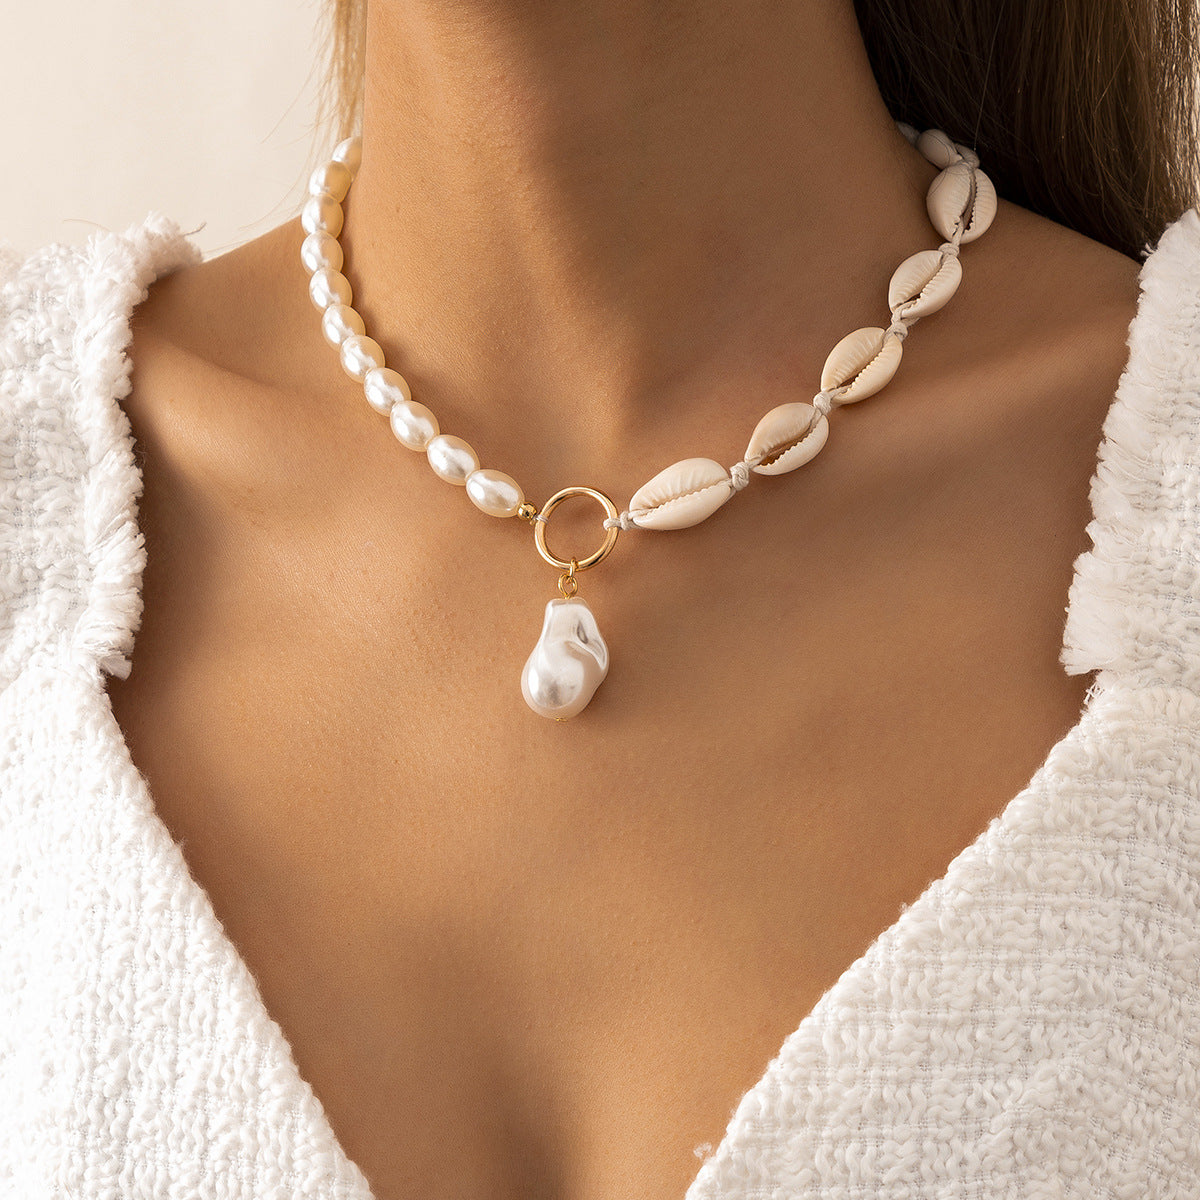 Beach Resort Style Baroque Shaped Pearl Necklace Shell Clavicle Chain